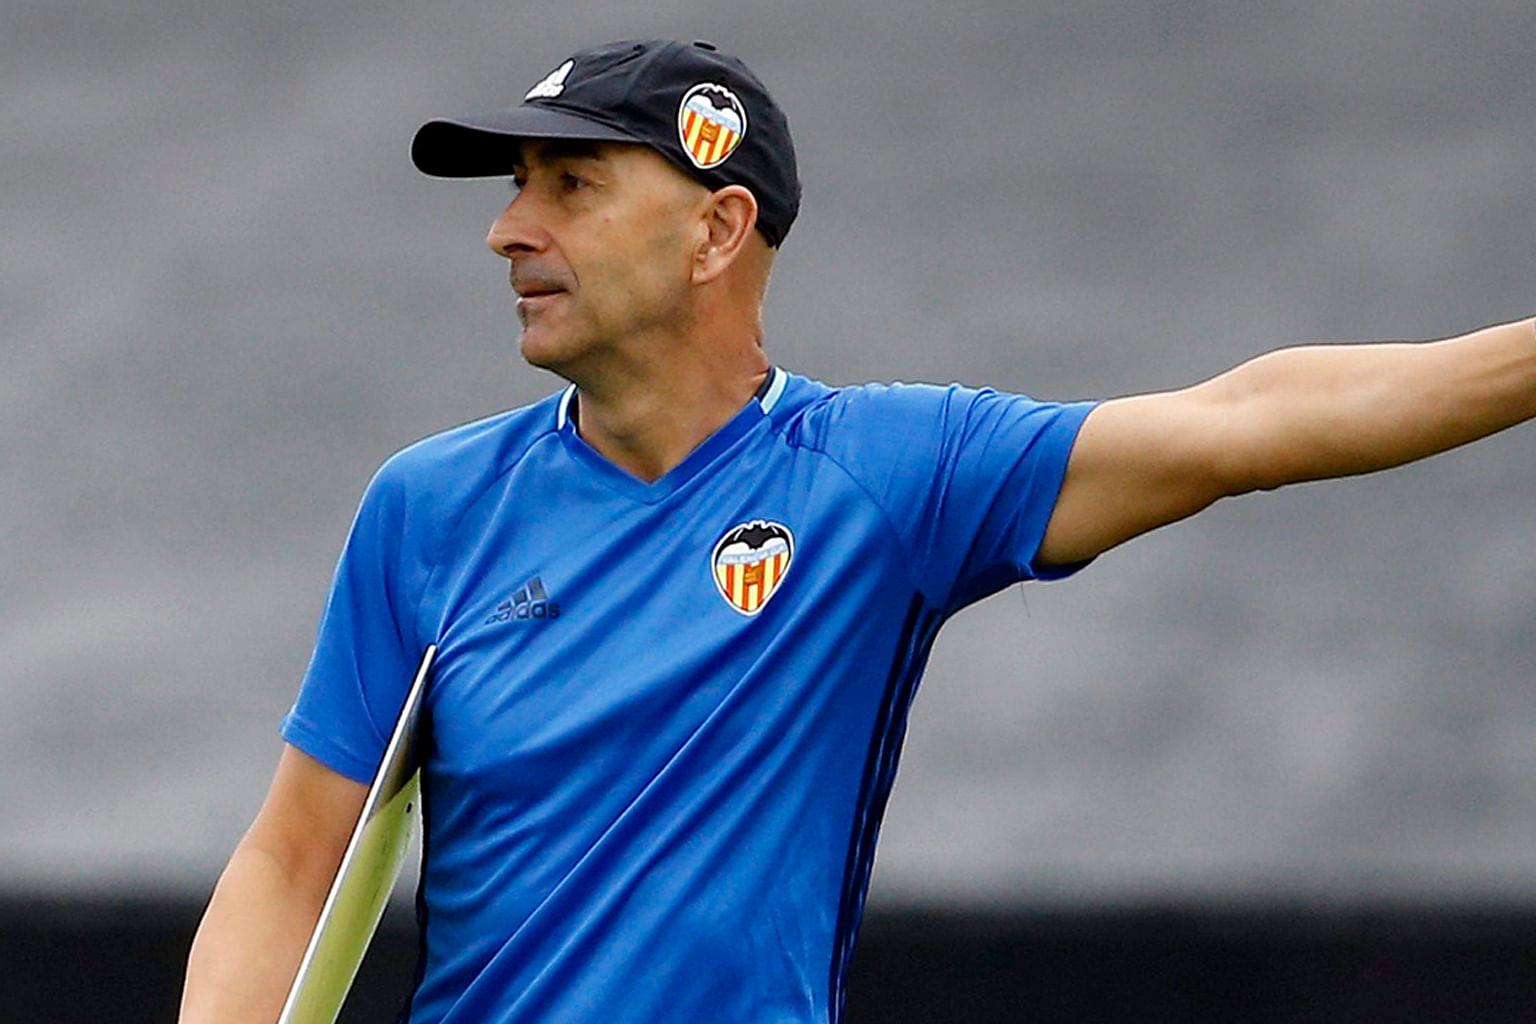 Valencia coach Pako Ayestaran says despite losing their two opening games, the club will adhere to a style of play that is attacking and based around possession.